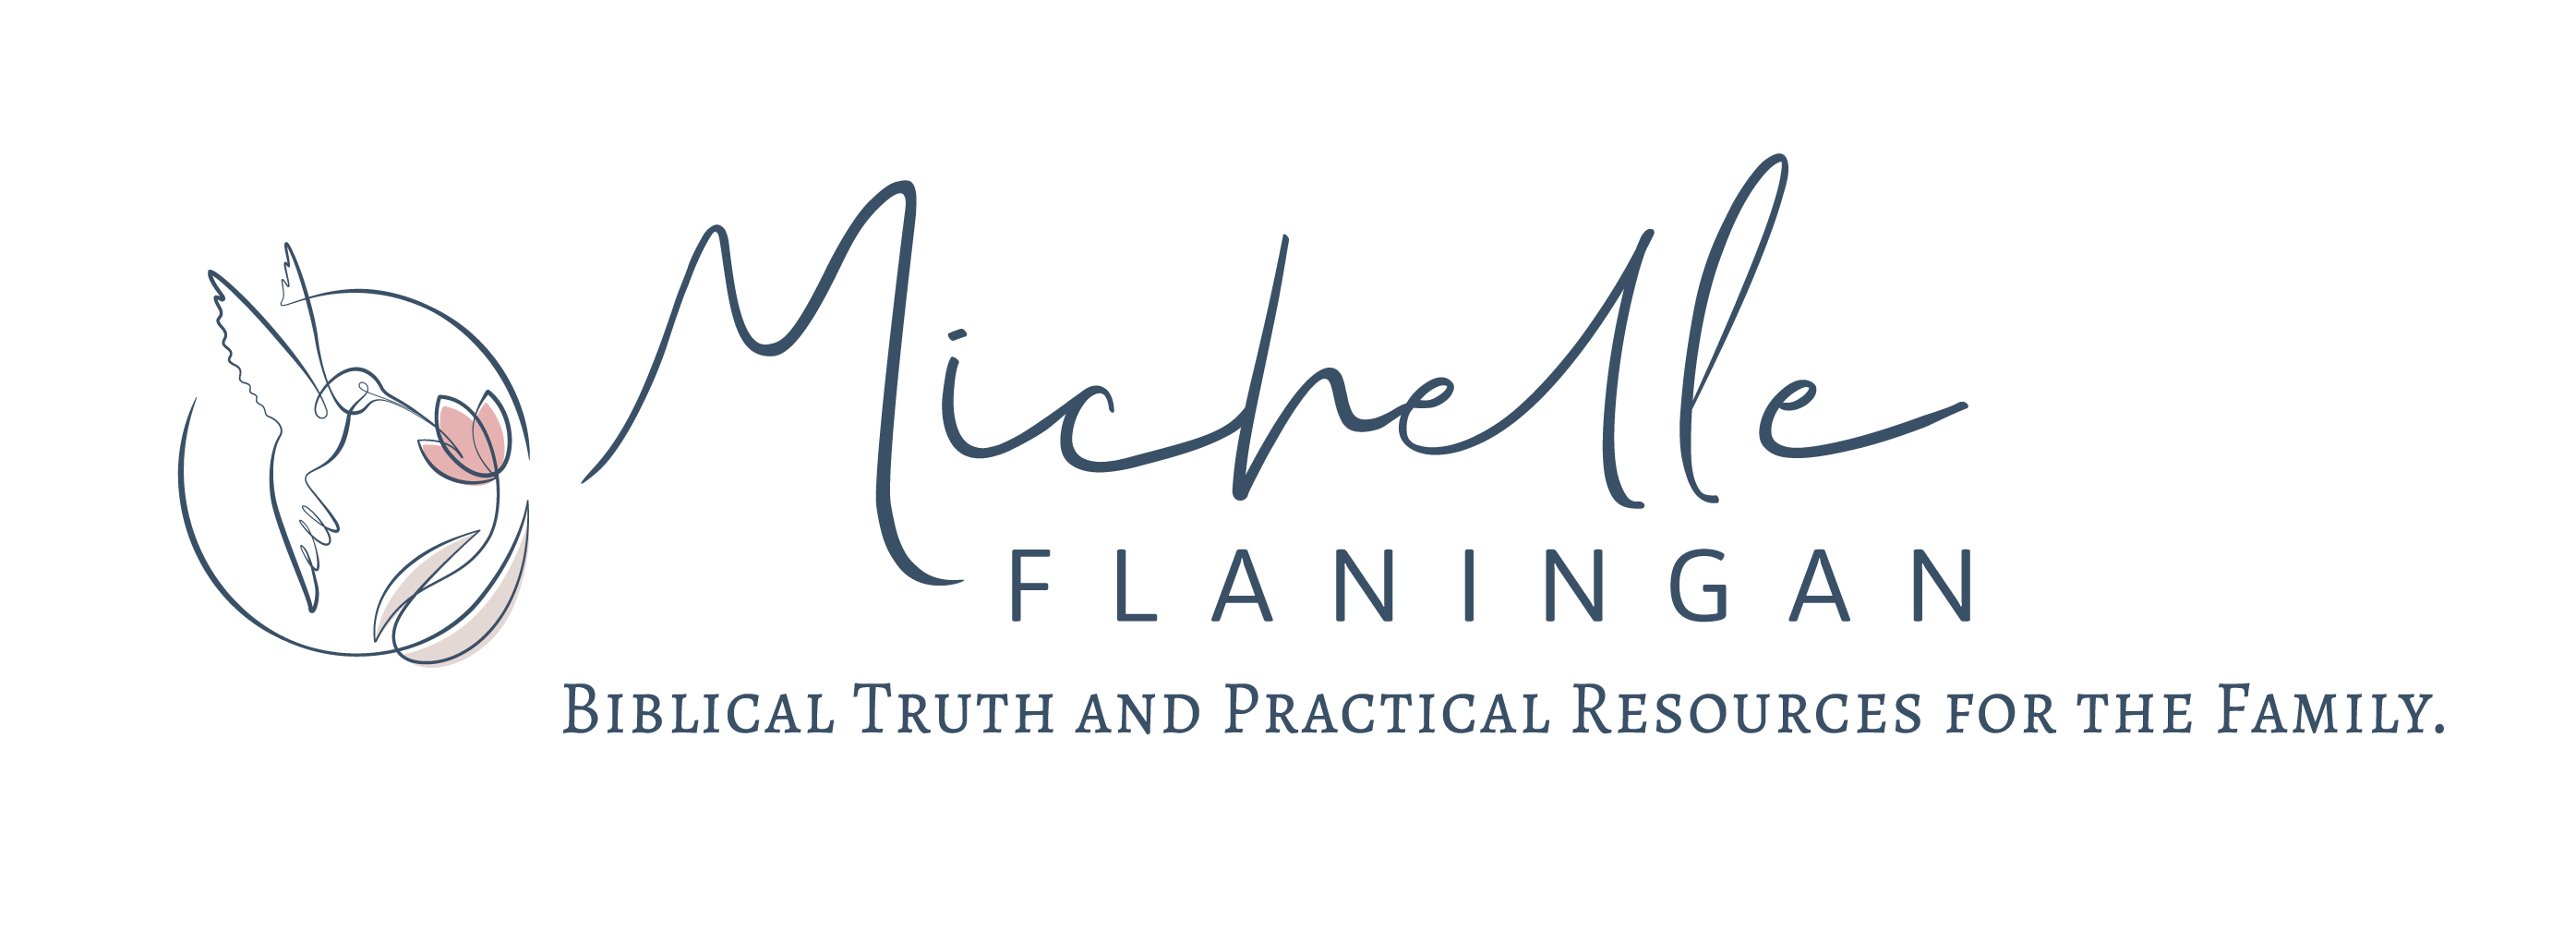 Michelle Flaningan - Biblical Truth and Practical Resources for the Family